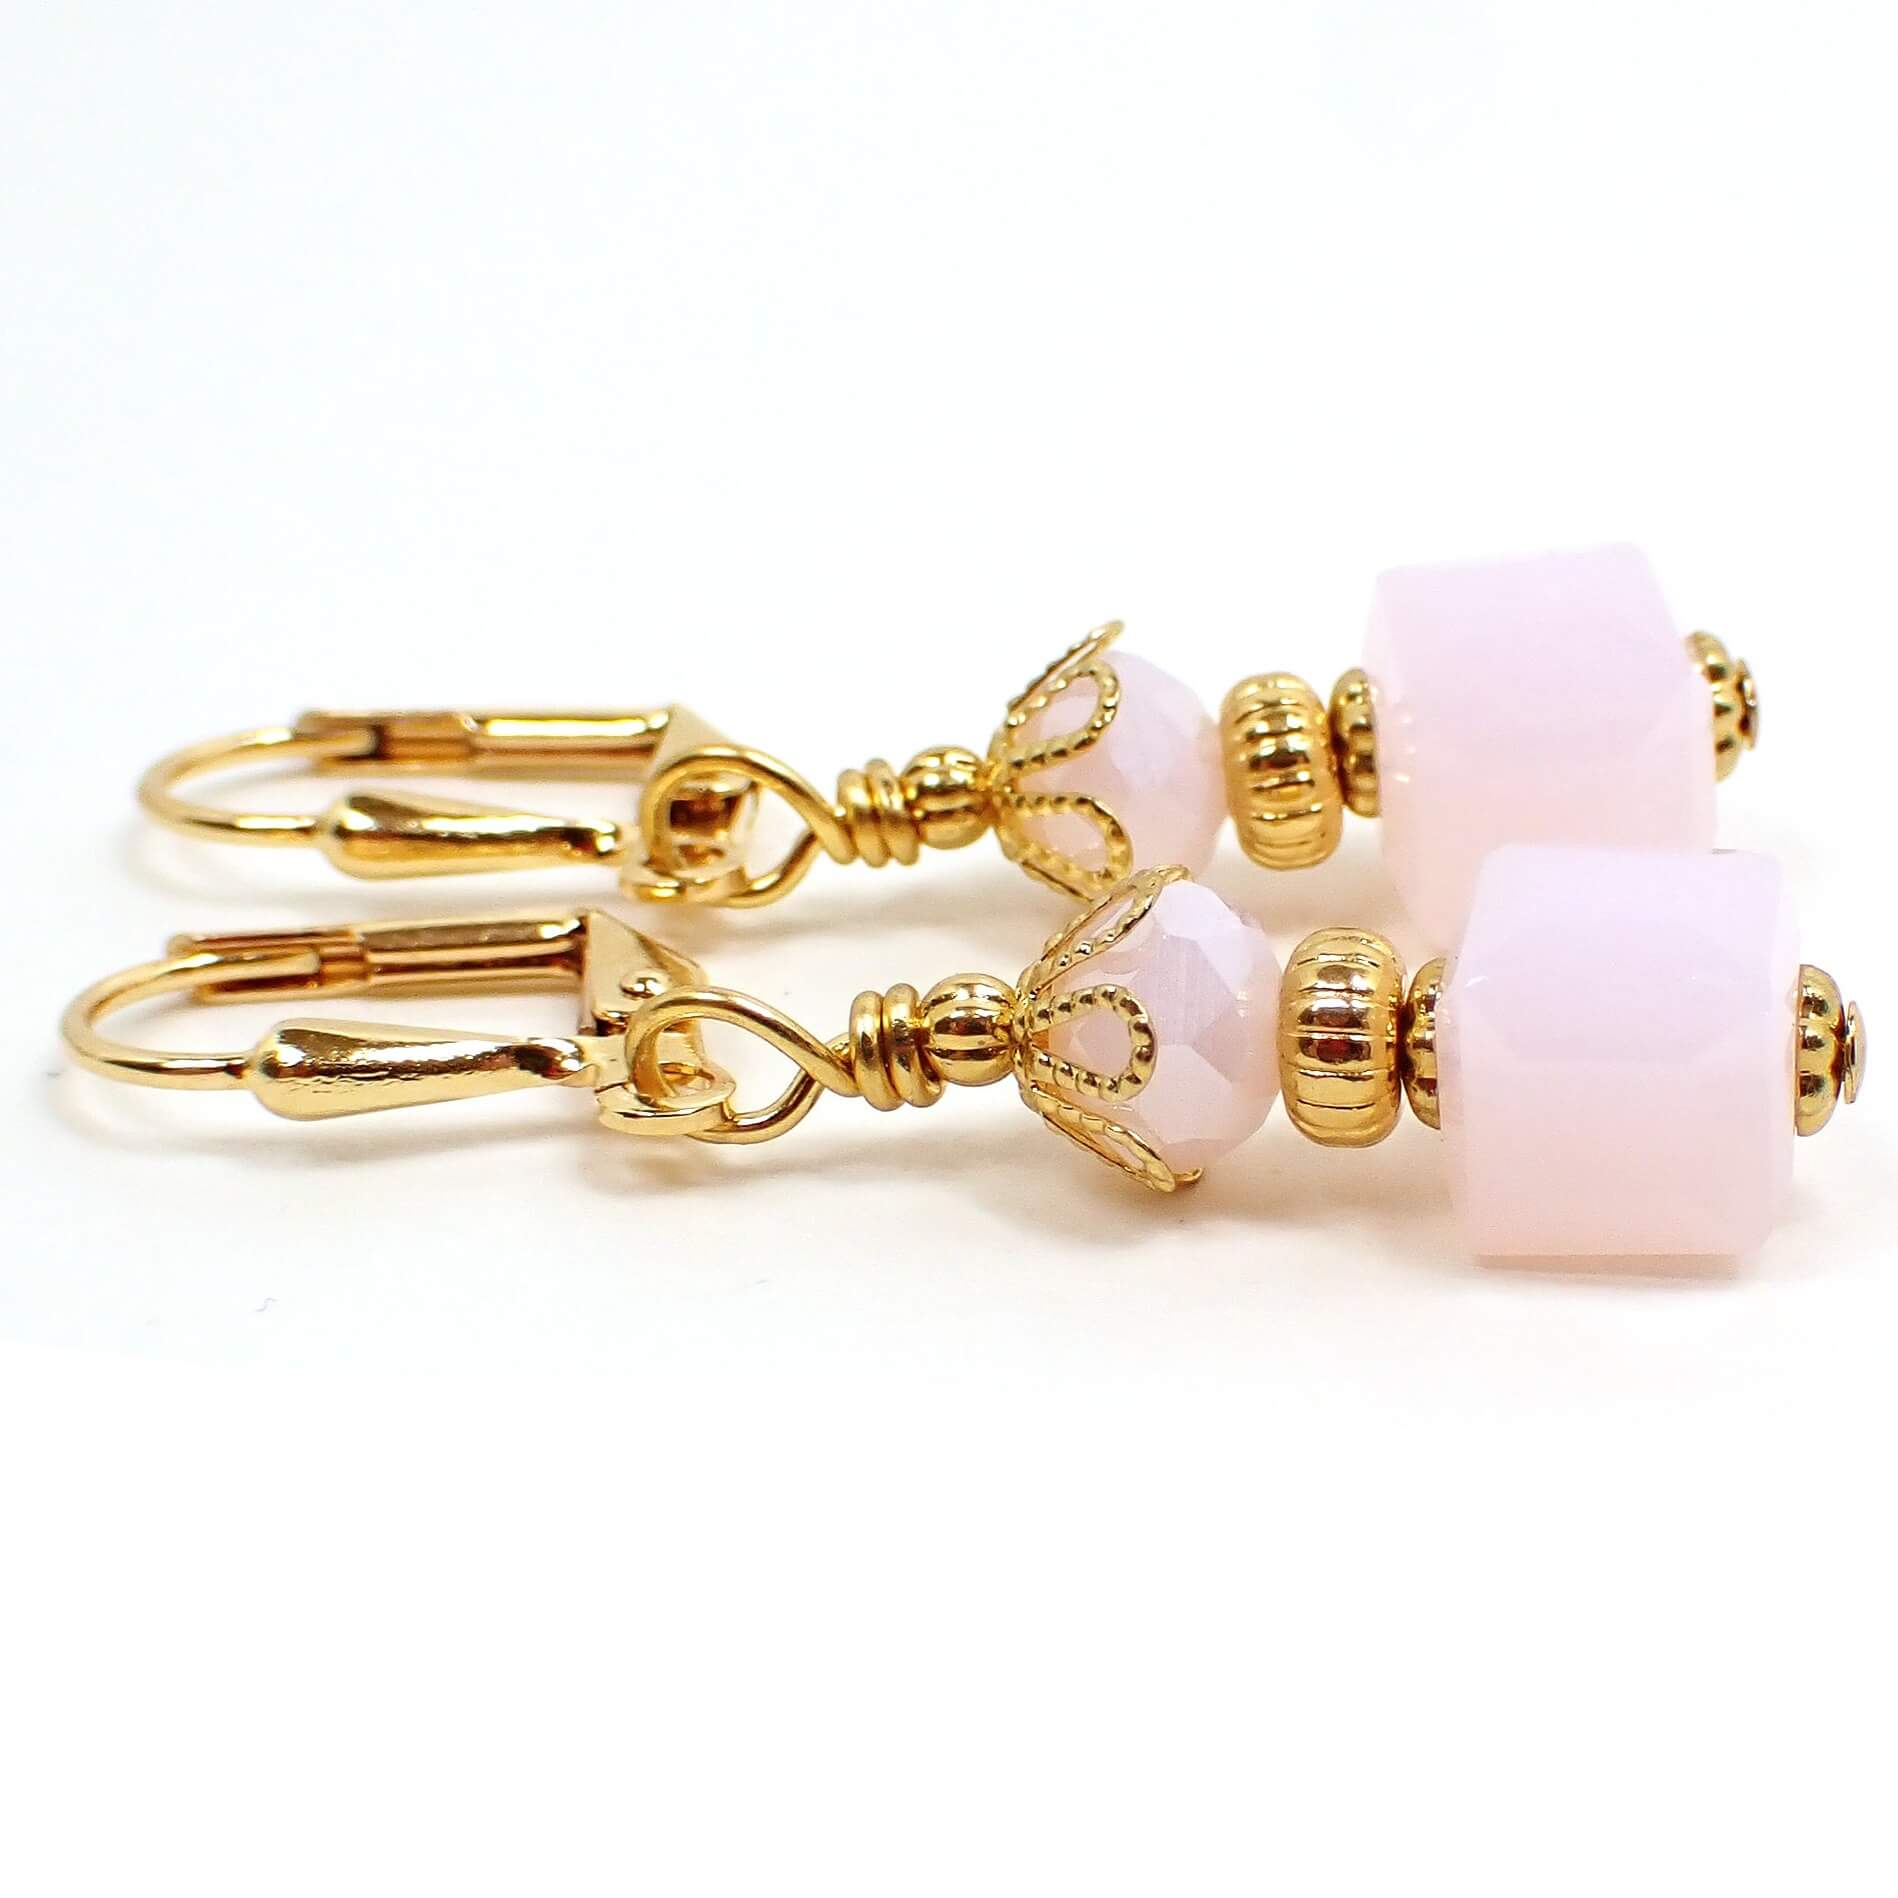 Side view of the small glass beaded earrings. The metal is gold plated in color. There are faceted glass crystal rondelle beads at the top and small cube shaped glass beads at the bottom. The beads are light pink in color.